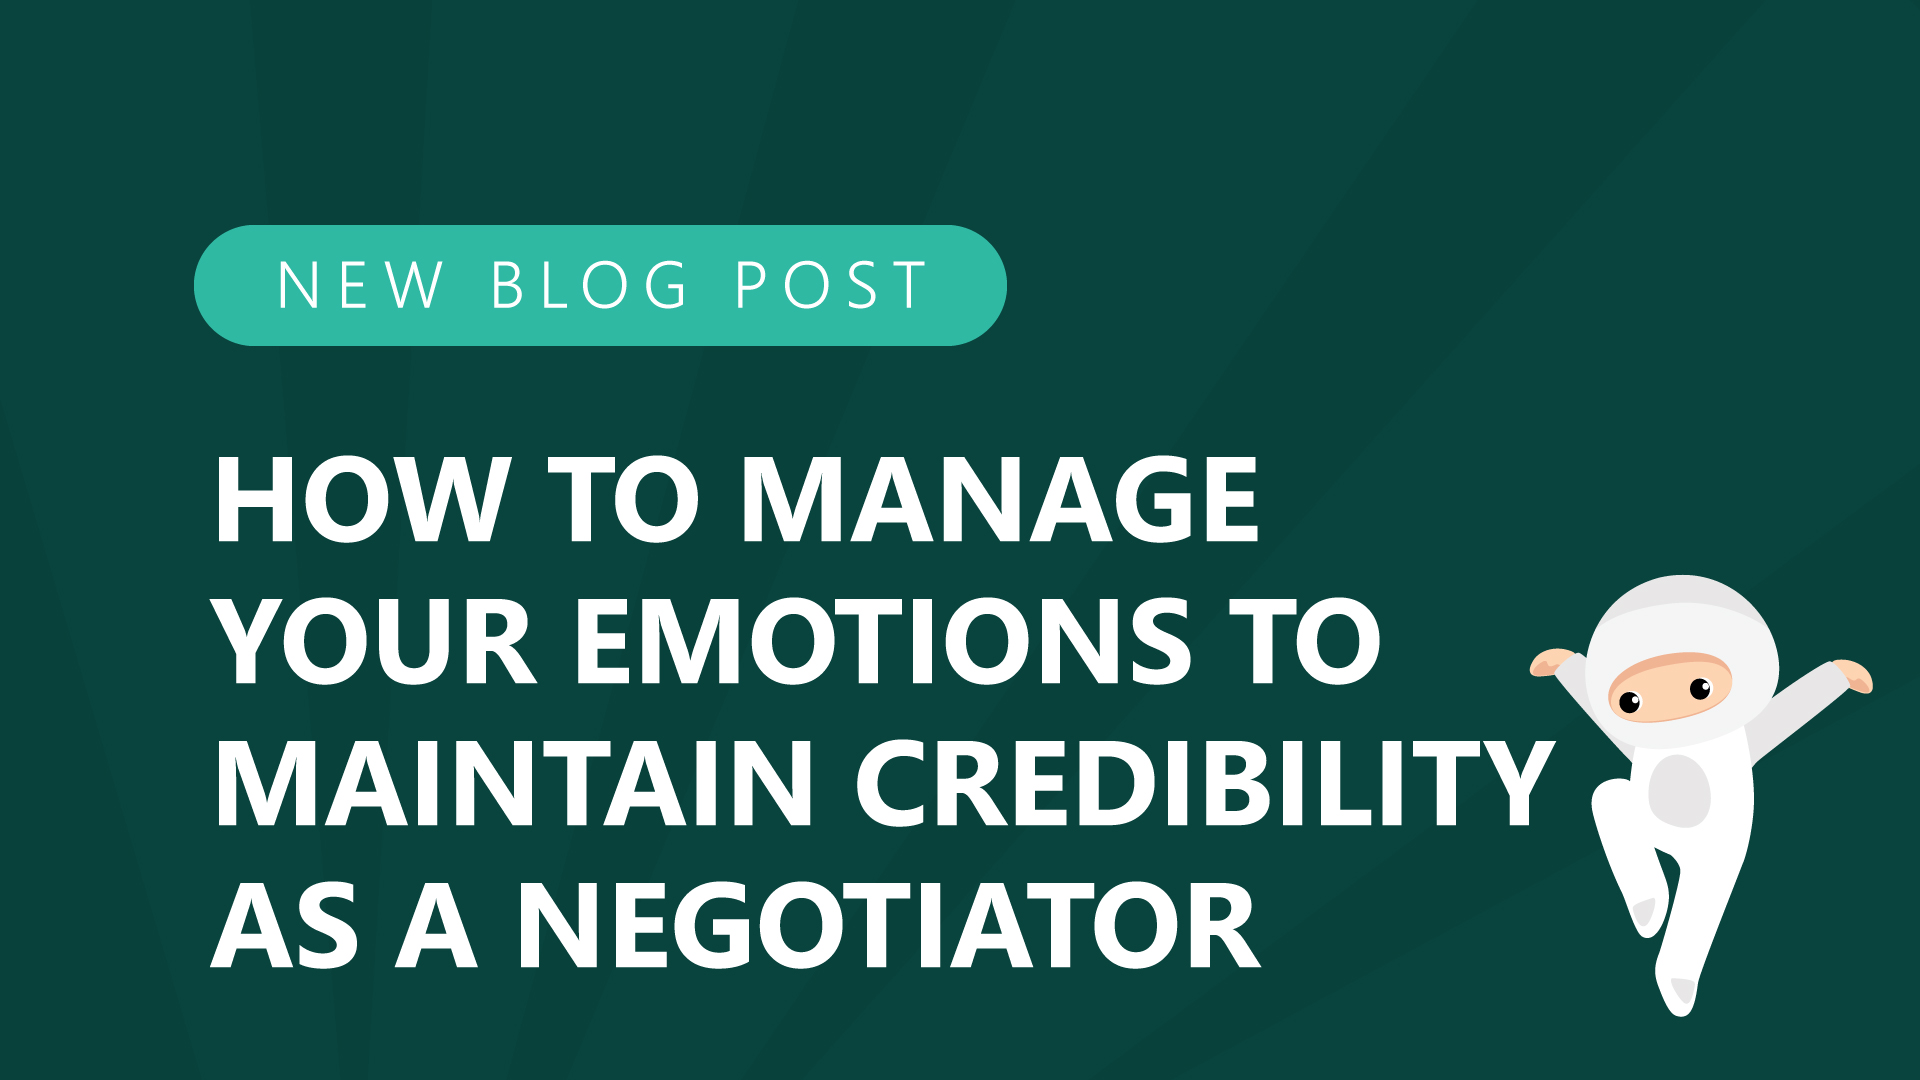 81-How-to-Manage-Your-Emotions-to-Maintain-Credibility-as-a-Negotiator.jpg